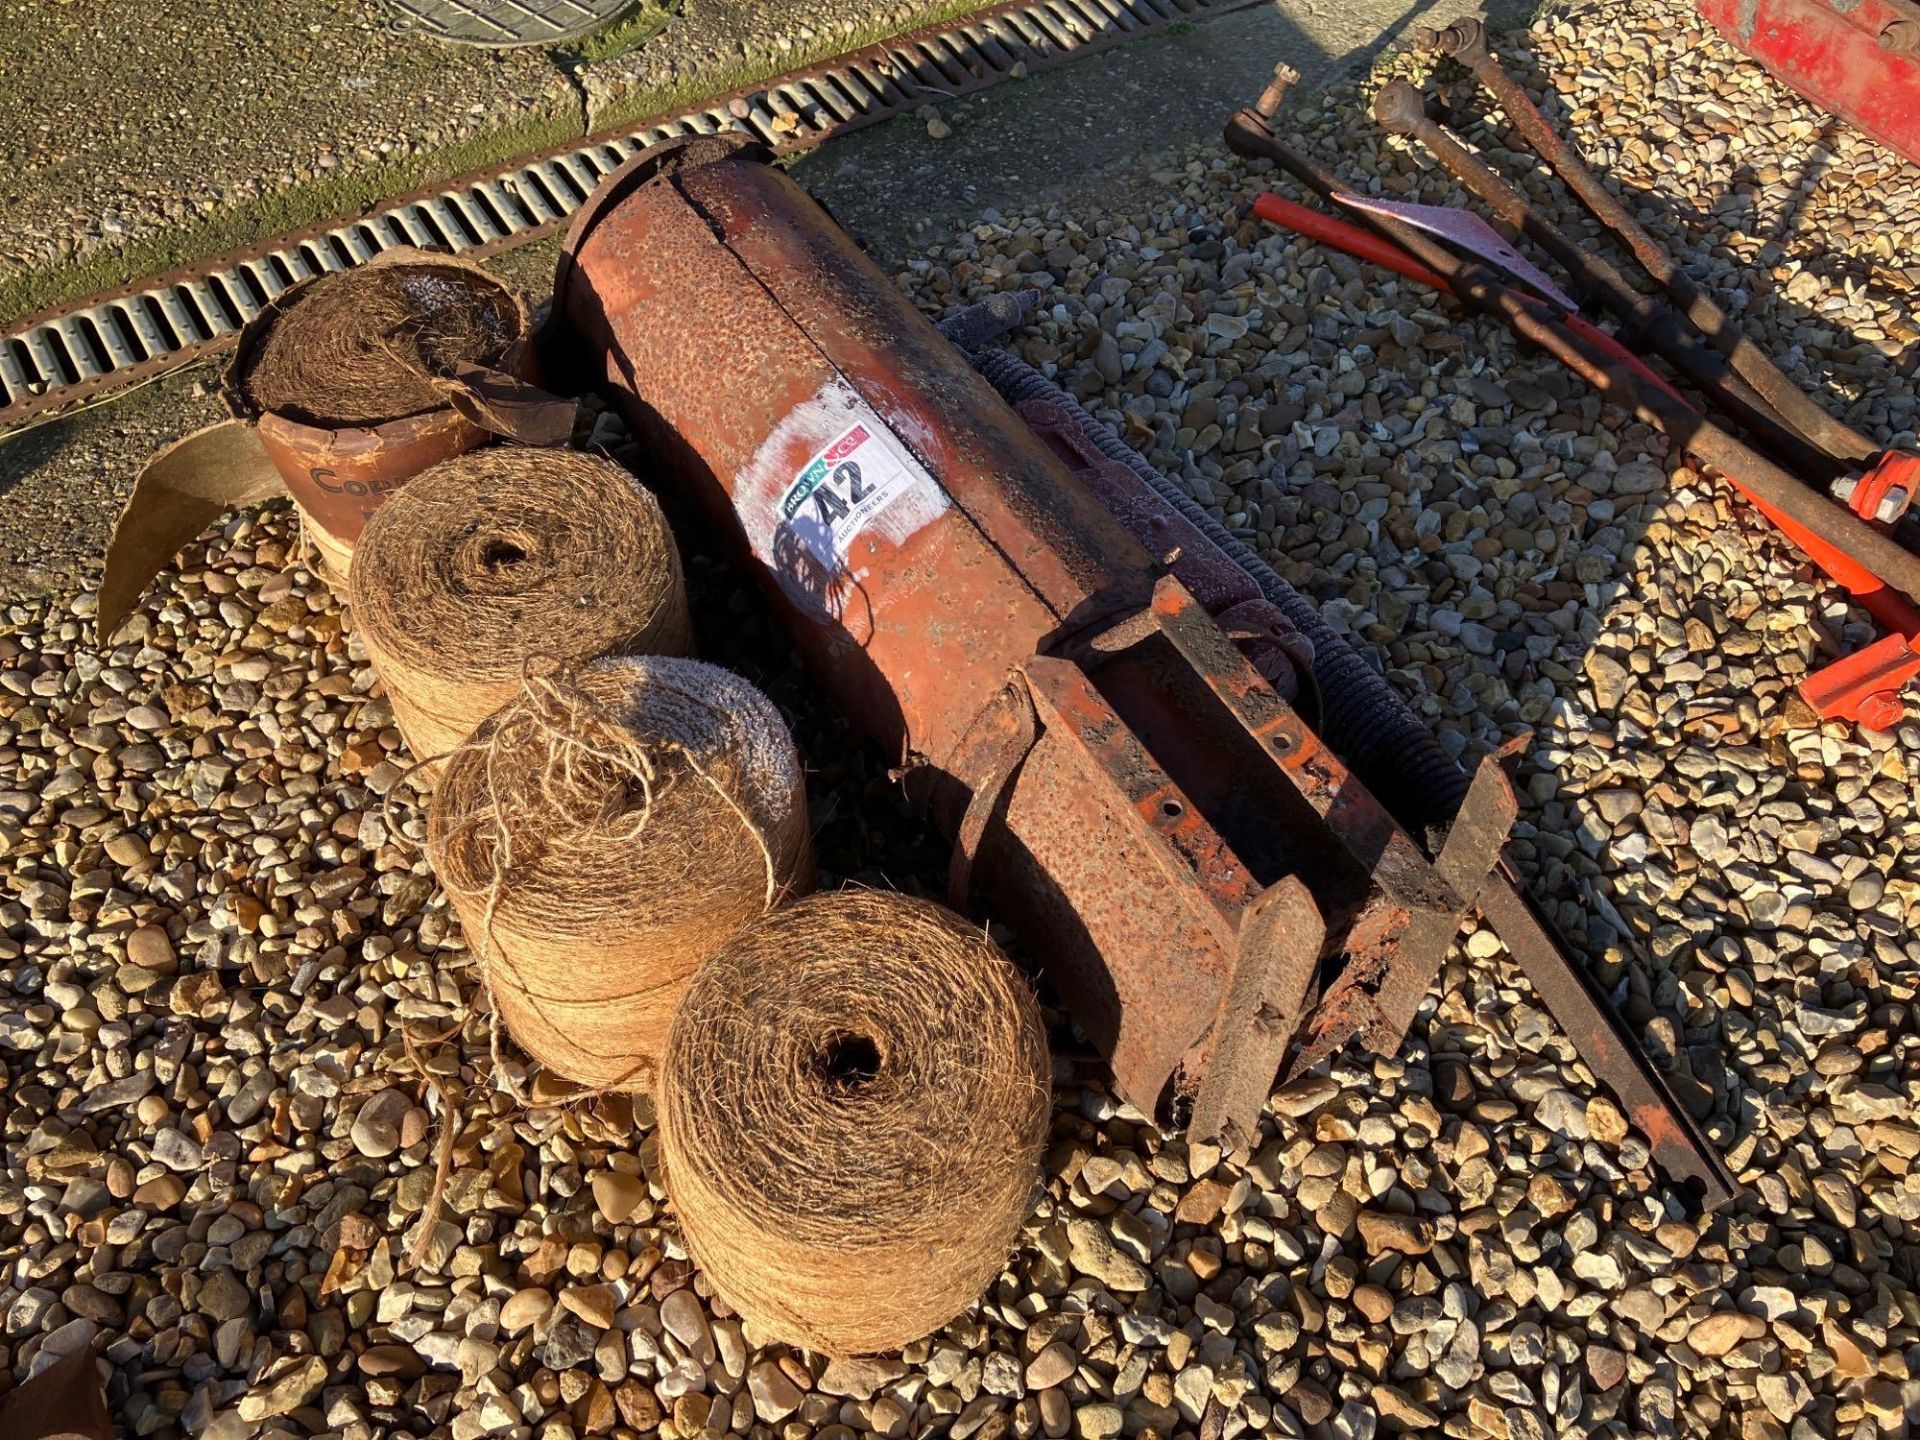 Allis Chalmers round baler string box, spares and Sisal twine